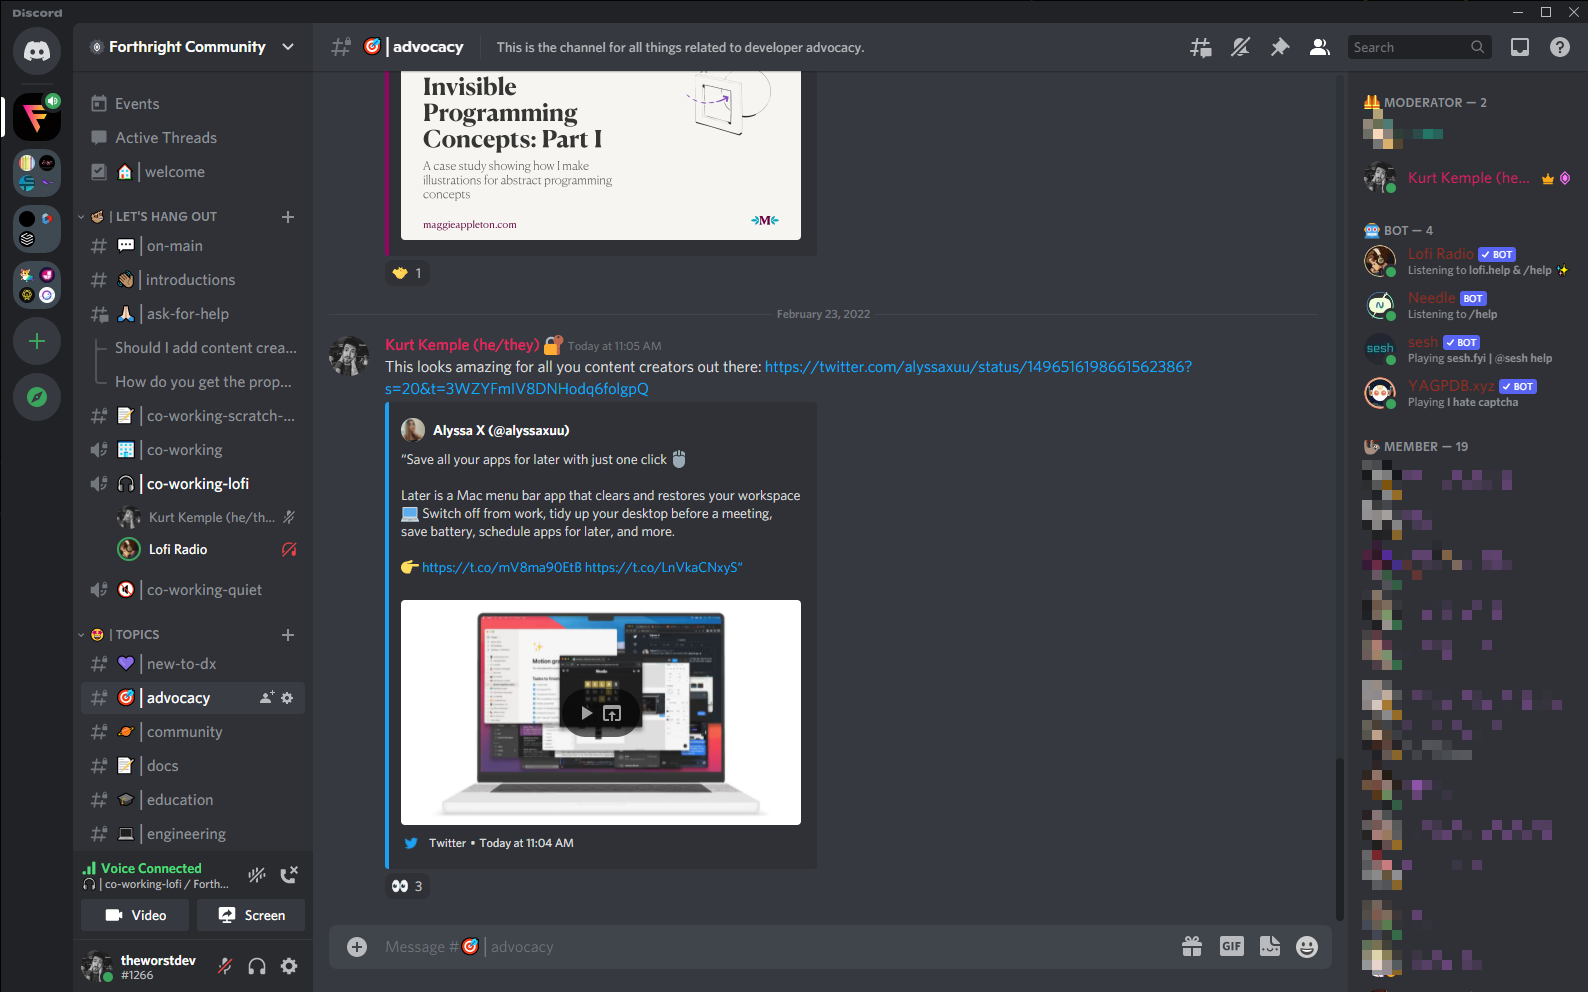 A screen capture of the Discord user interface.